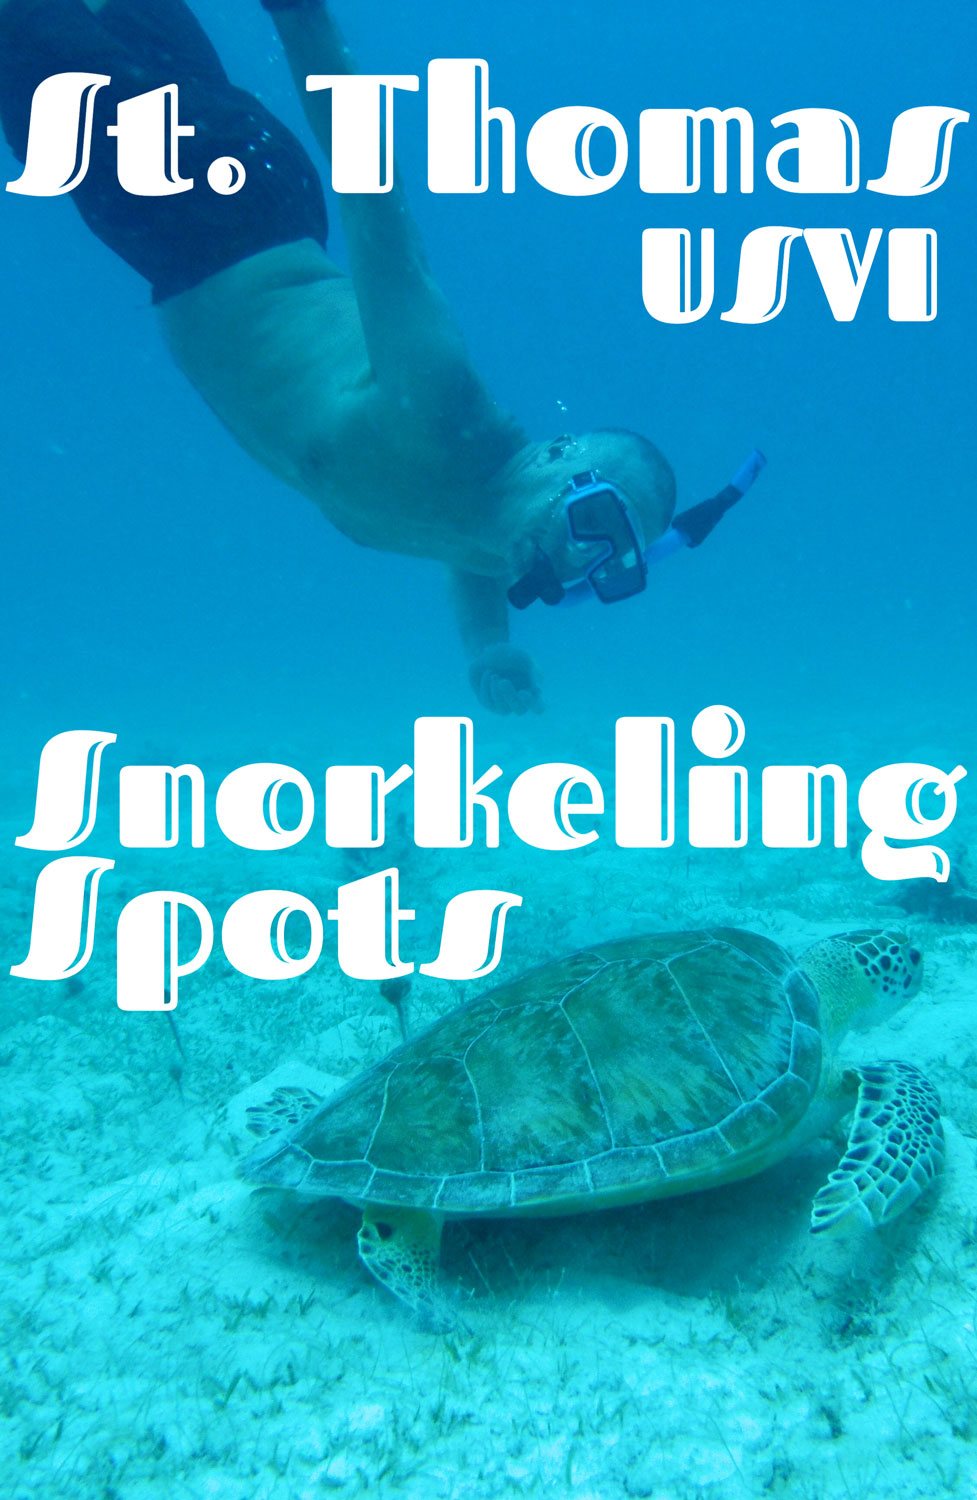 St. Thomas Snorkeling Spots: Choosing What's Best For You